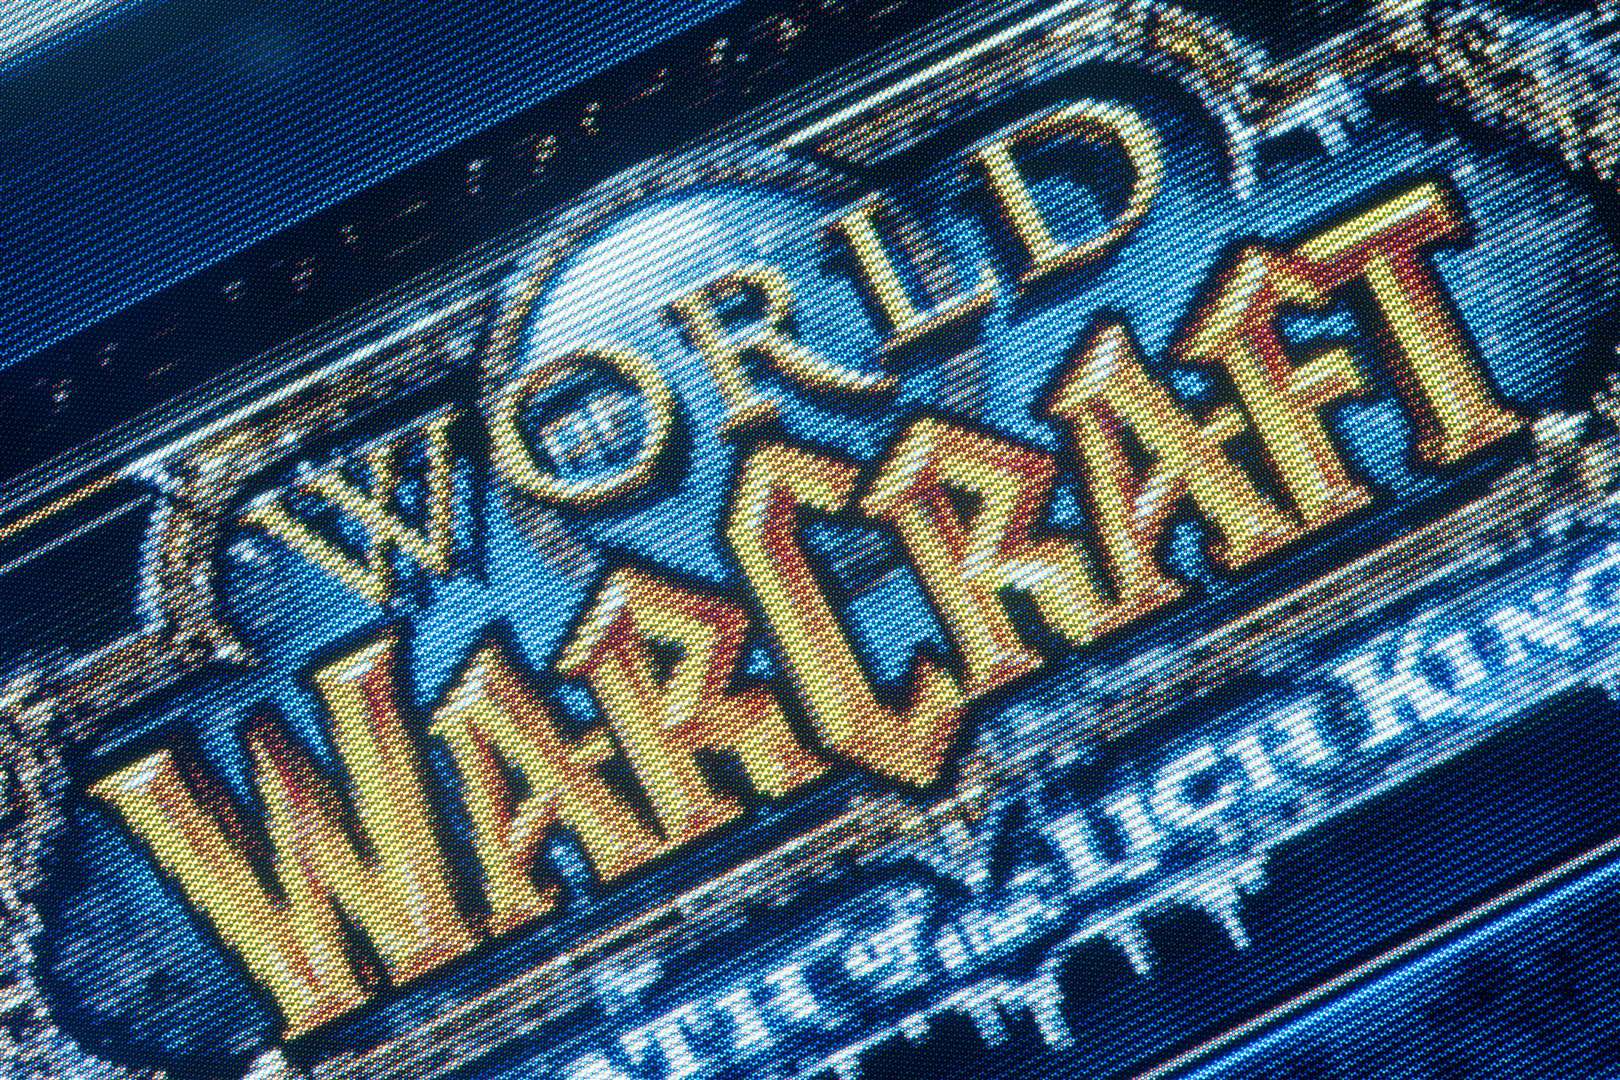 World Of Warcraft became globally popular after it was released by Blizzard Entertainment in 2004 (Paul Carstairs/Alamy/PA)